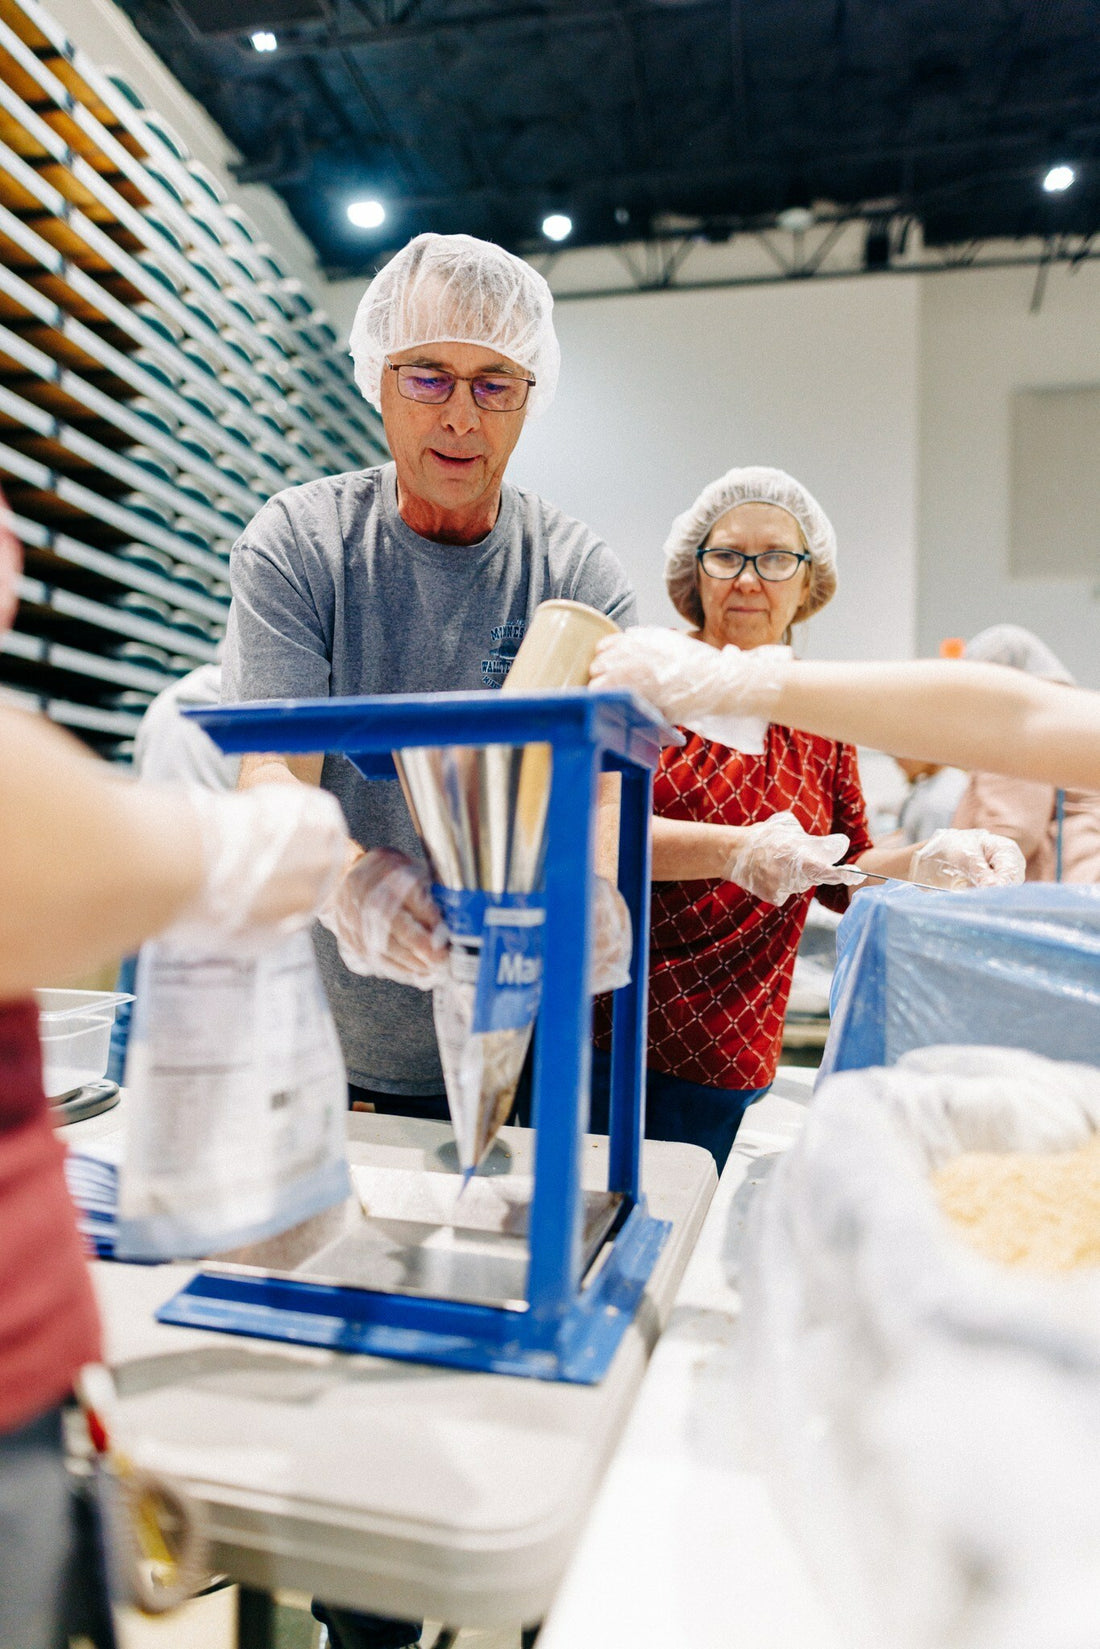 Feed My Starving Children celebrates 4 billionth meal